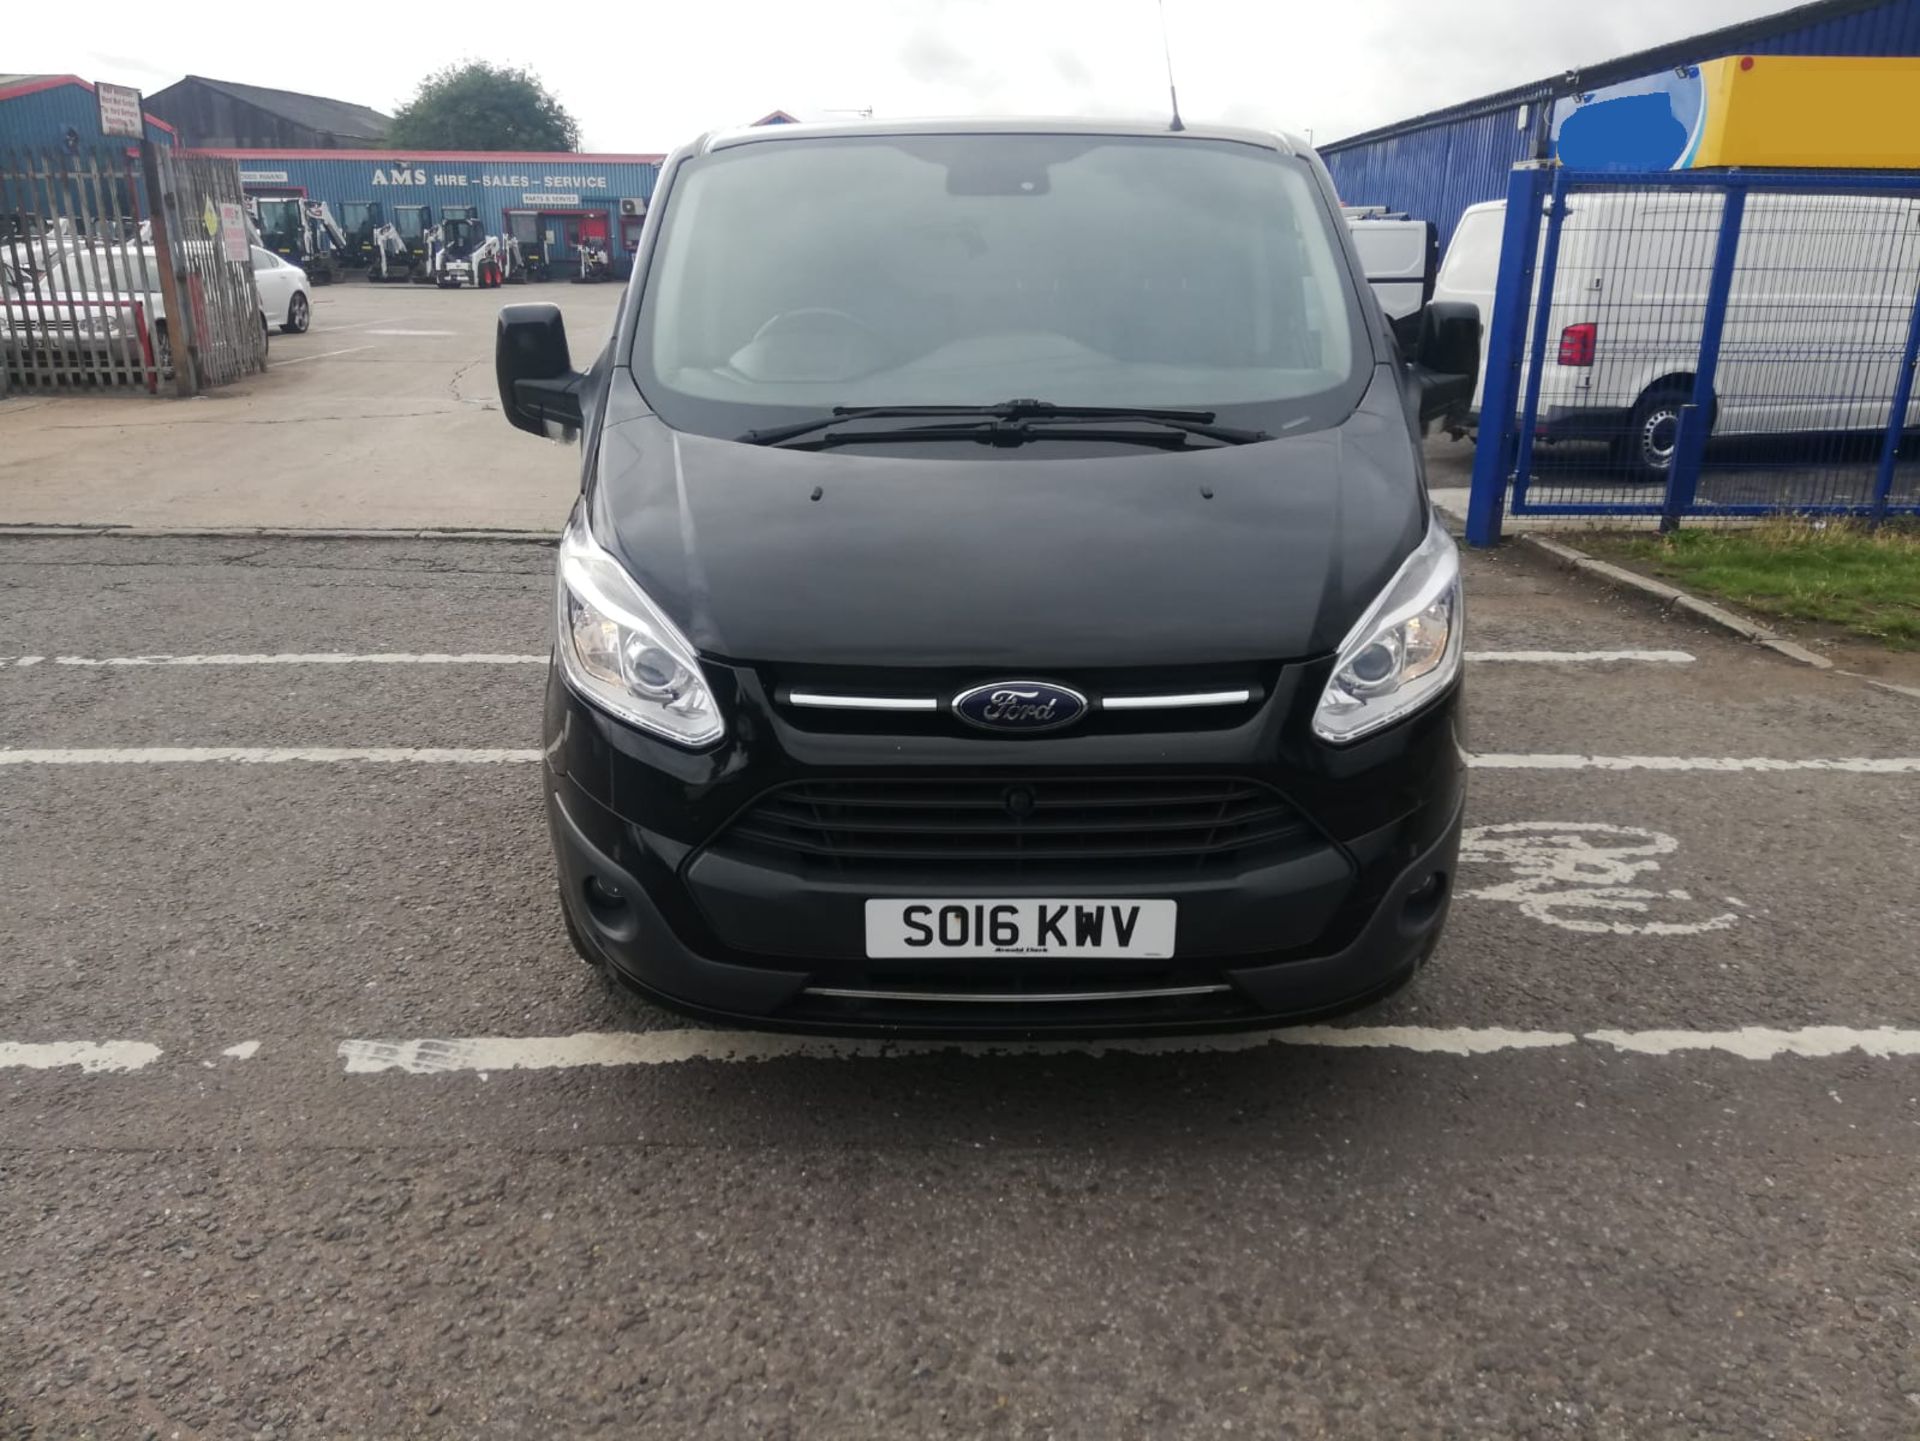 2016 16 FORD TRANSIT CUSTOM LIMITED 2.0 PANEL VAN - 64K MILES - EURO 6 - AIR CON - ALLOY WHEELS - Image 2 of 10